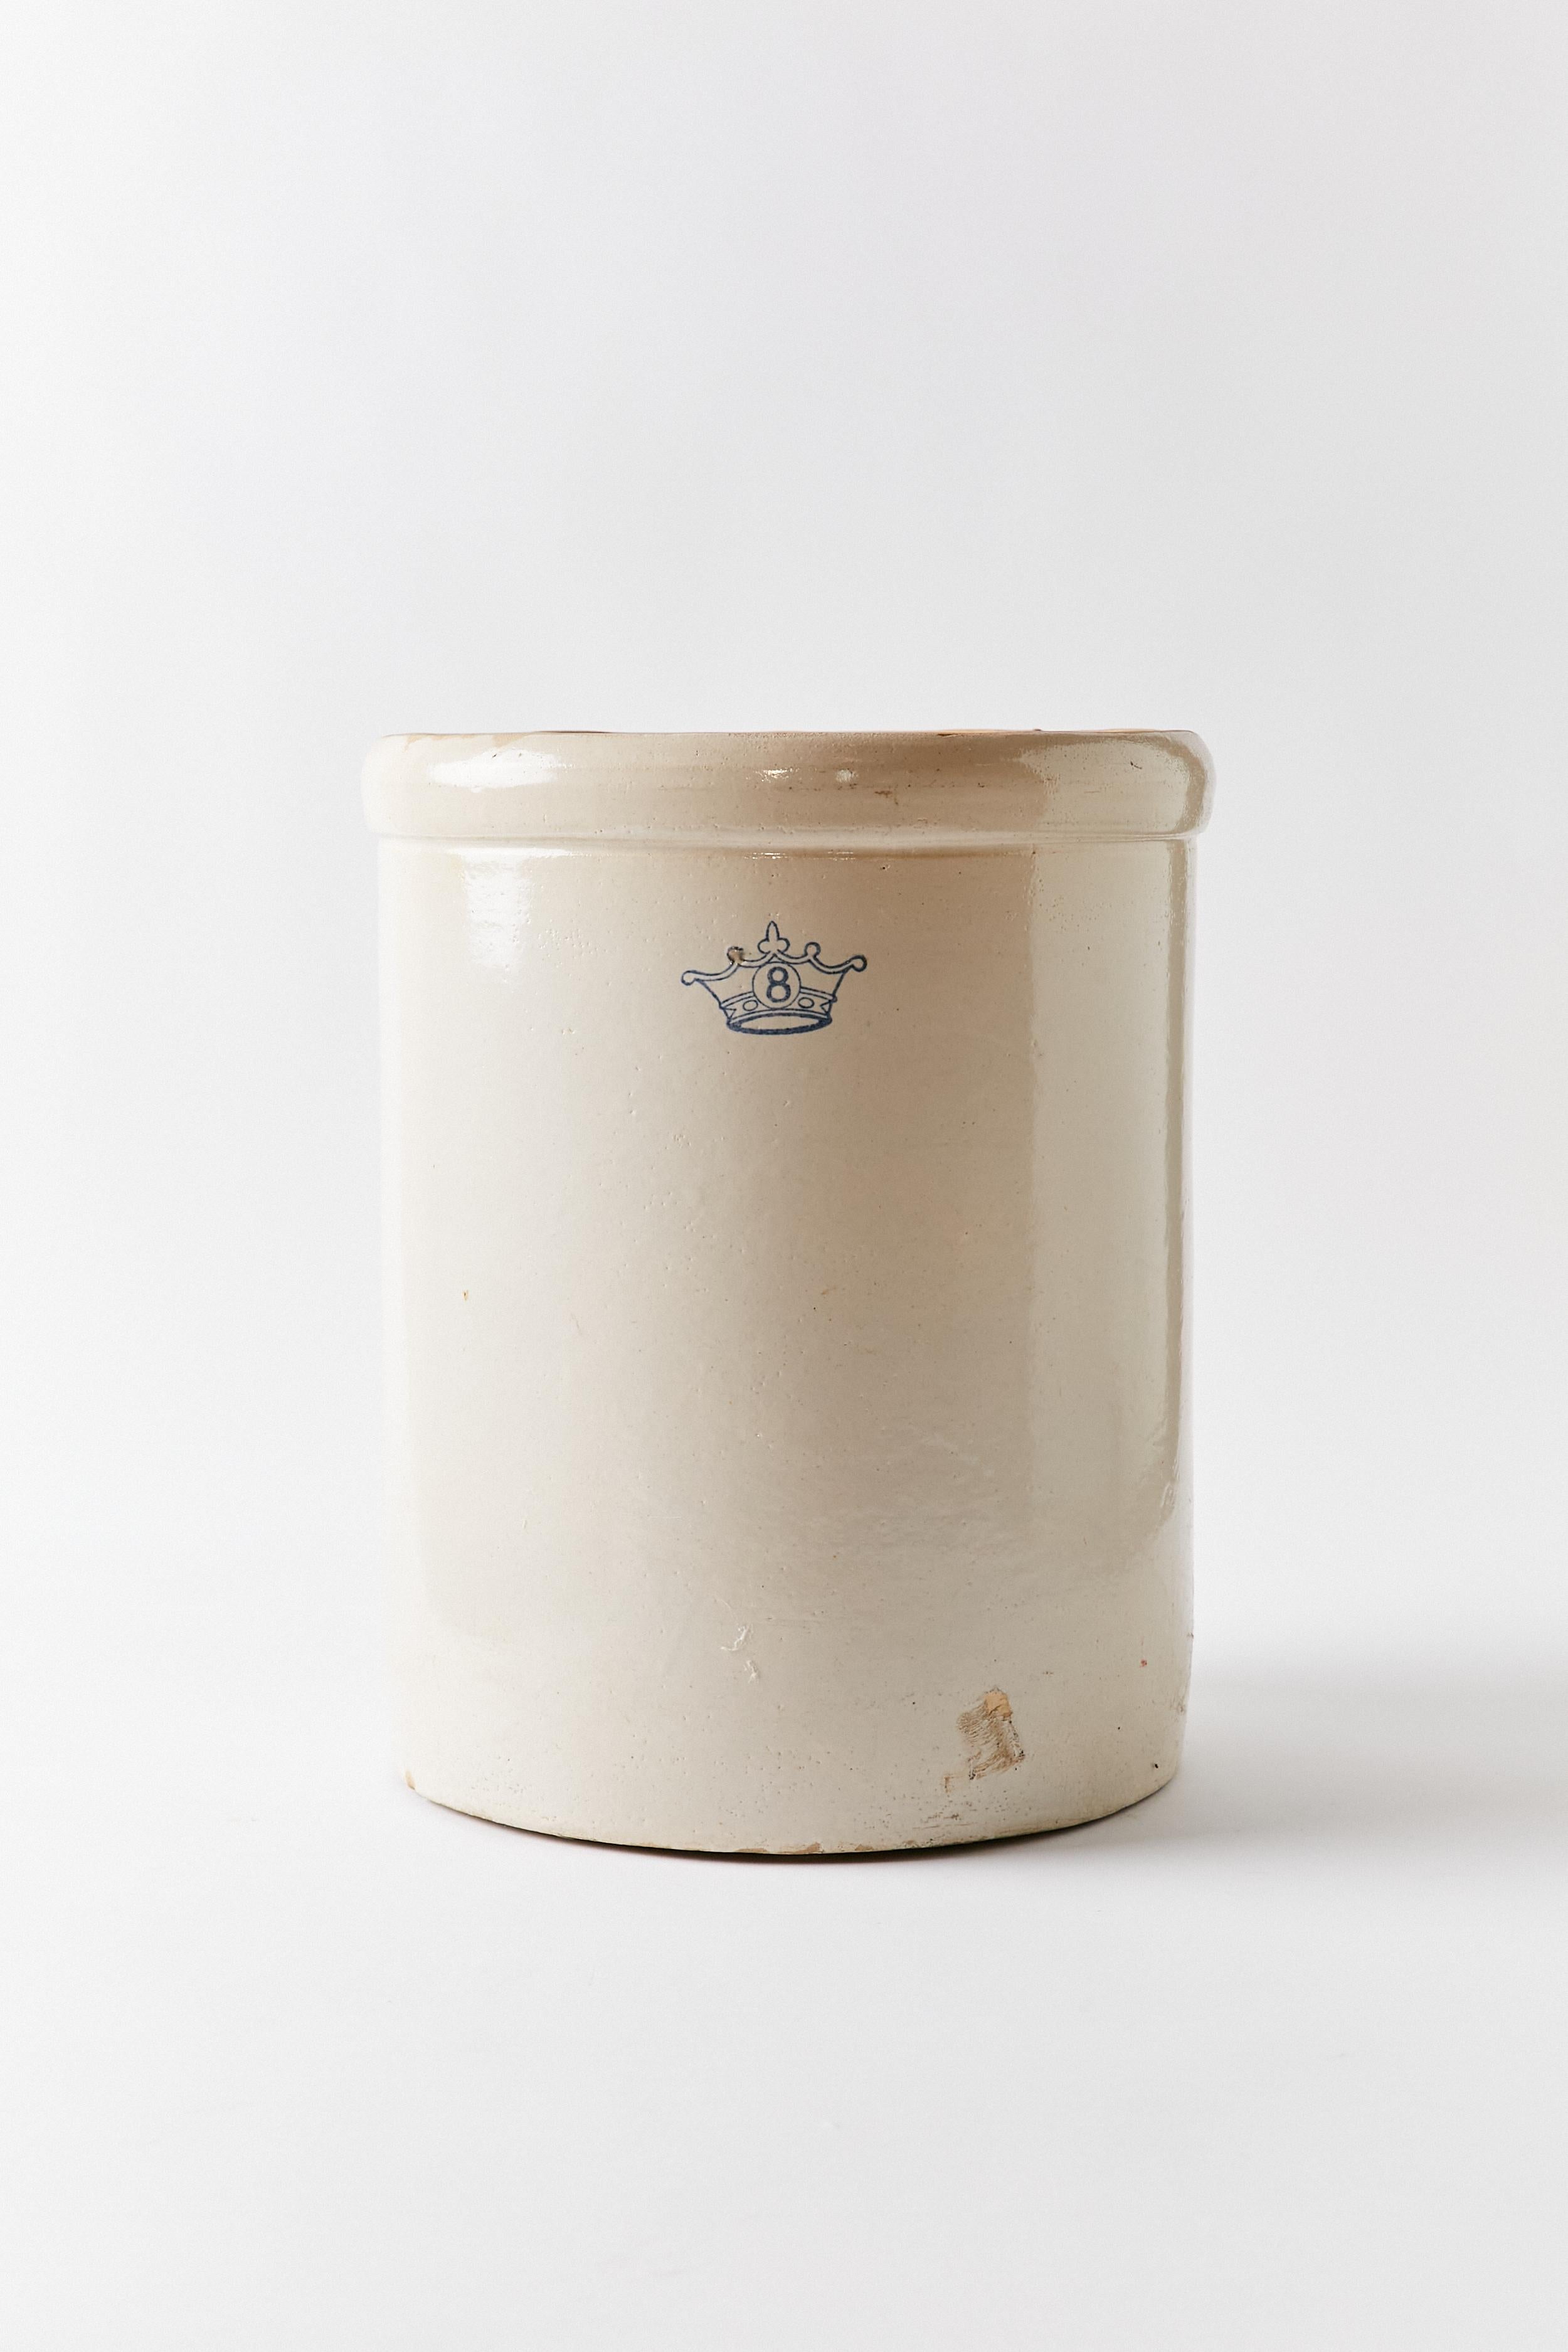 A Robinson Ransbottom eight gallon stoneware crock with the logo of the Ransbottom crown with the number eight inside it. Made in Roseville, Ohio.